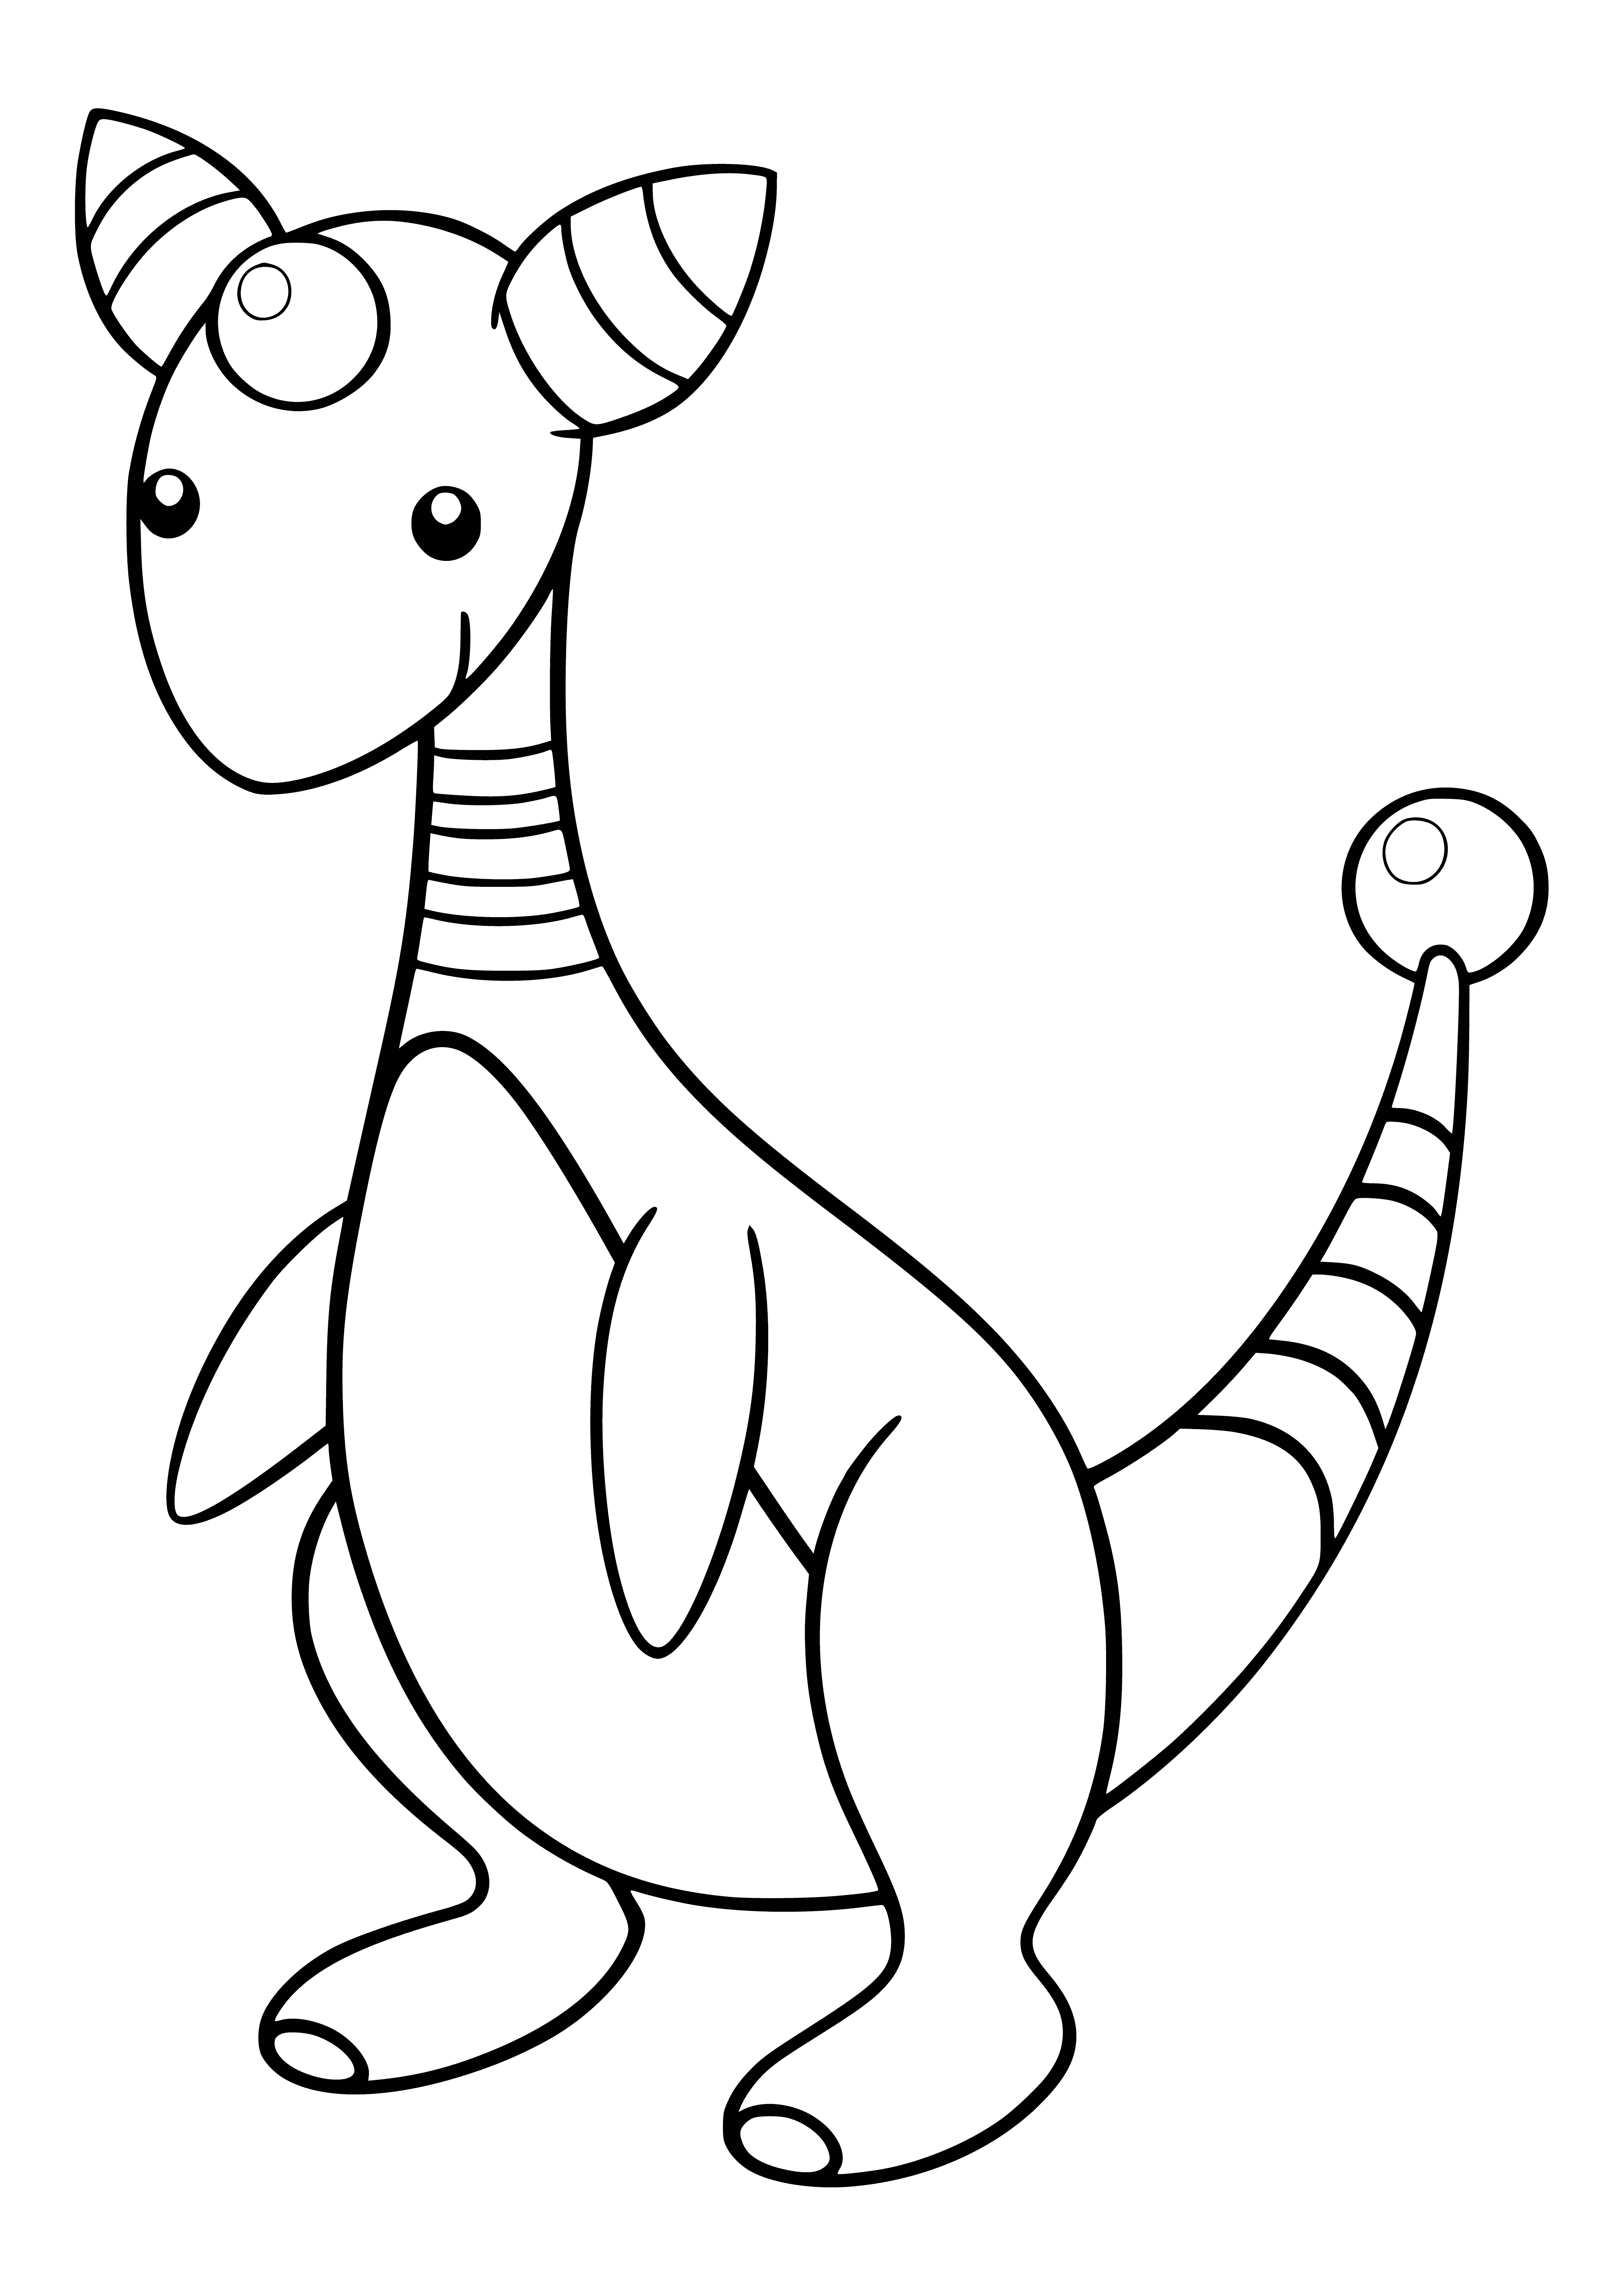 coloring page: Pirates burned down a village's homes, but one villager created Ampharos, a Pokemon that produces electricity, allowing the village to rebuild. Today, it still powers many homes around the world.